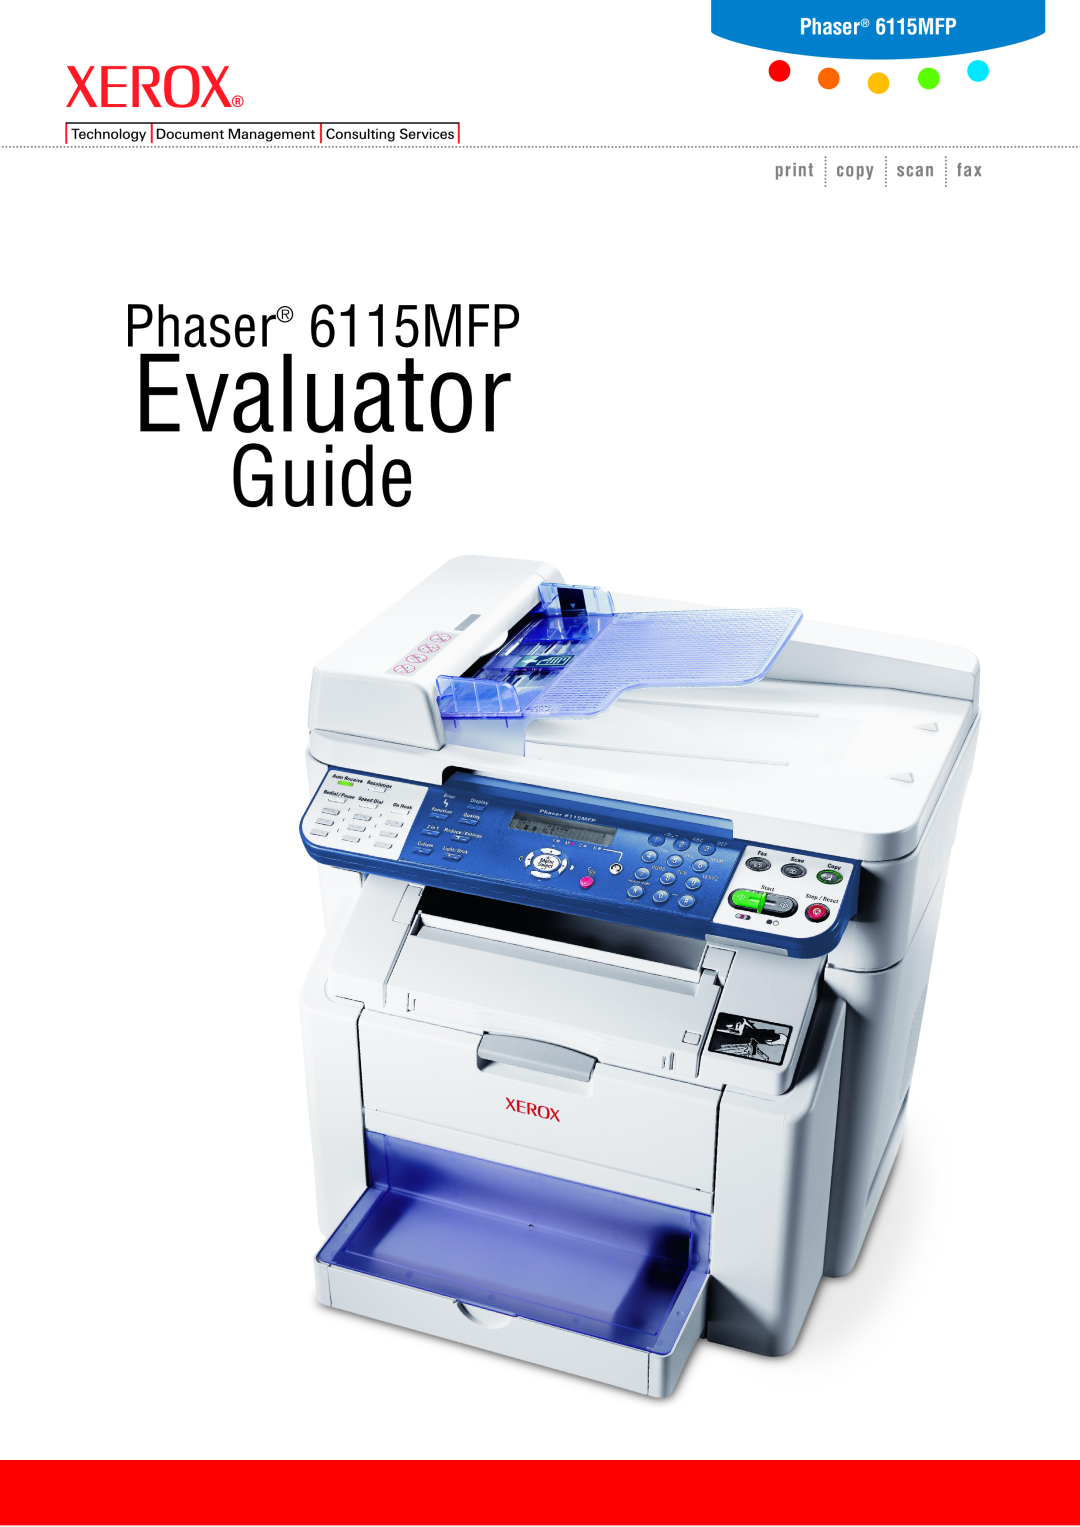 Xerox manual Phaser 6115MFP, Evaluator, Guide, print copy scan fax 